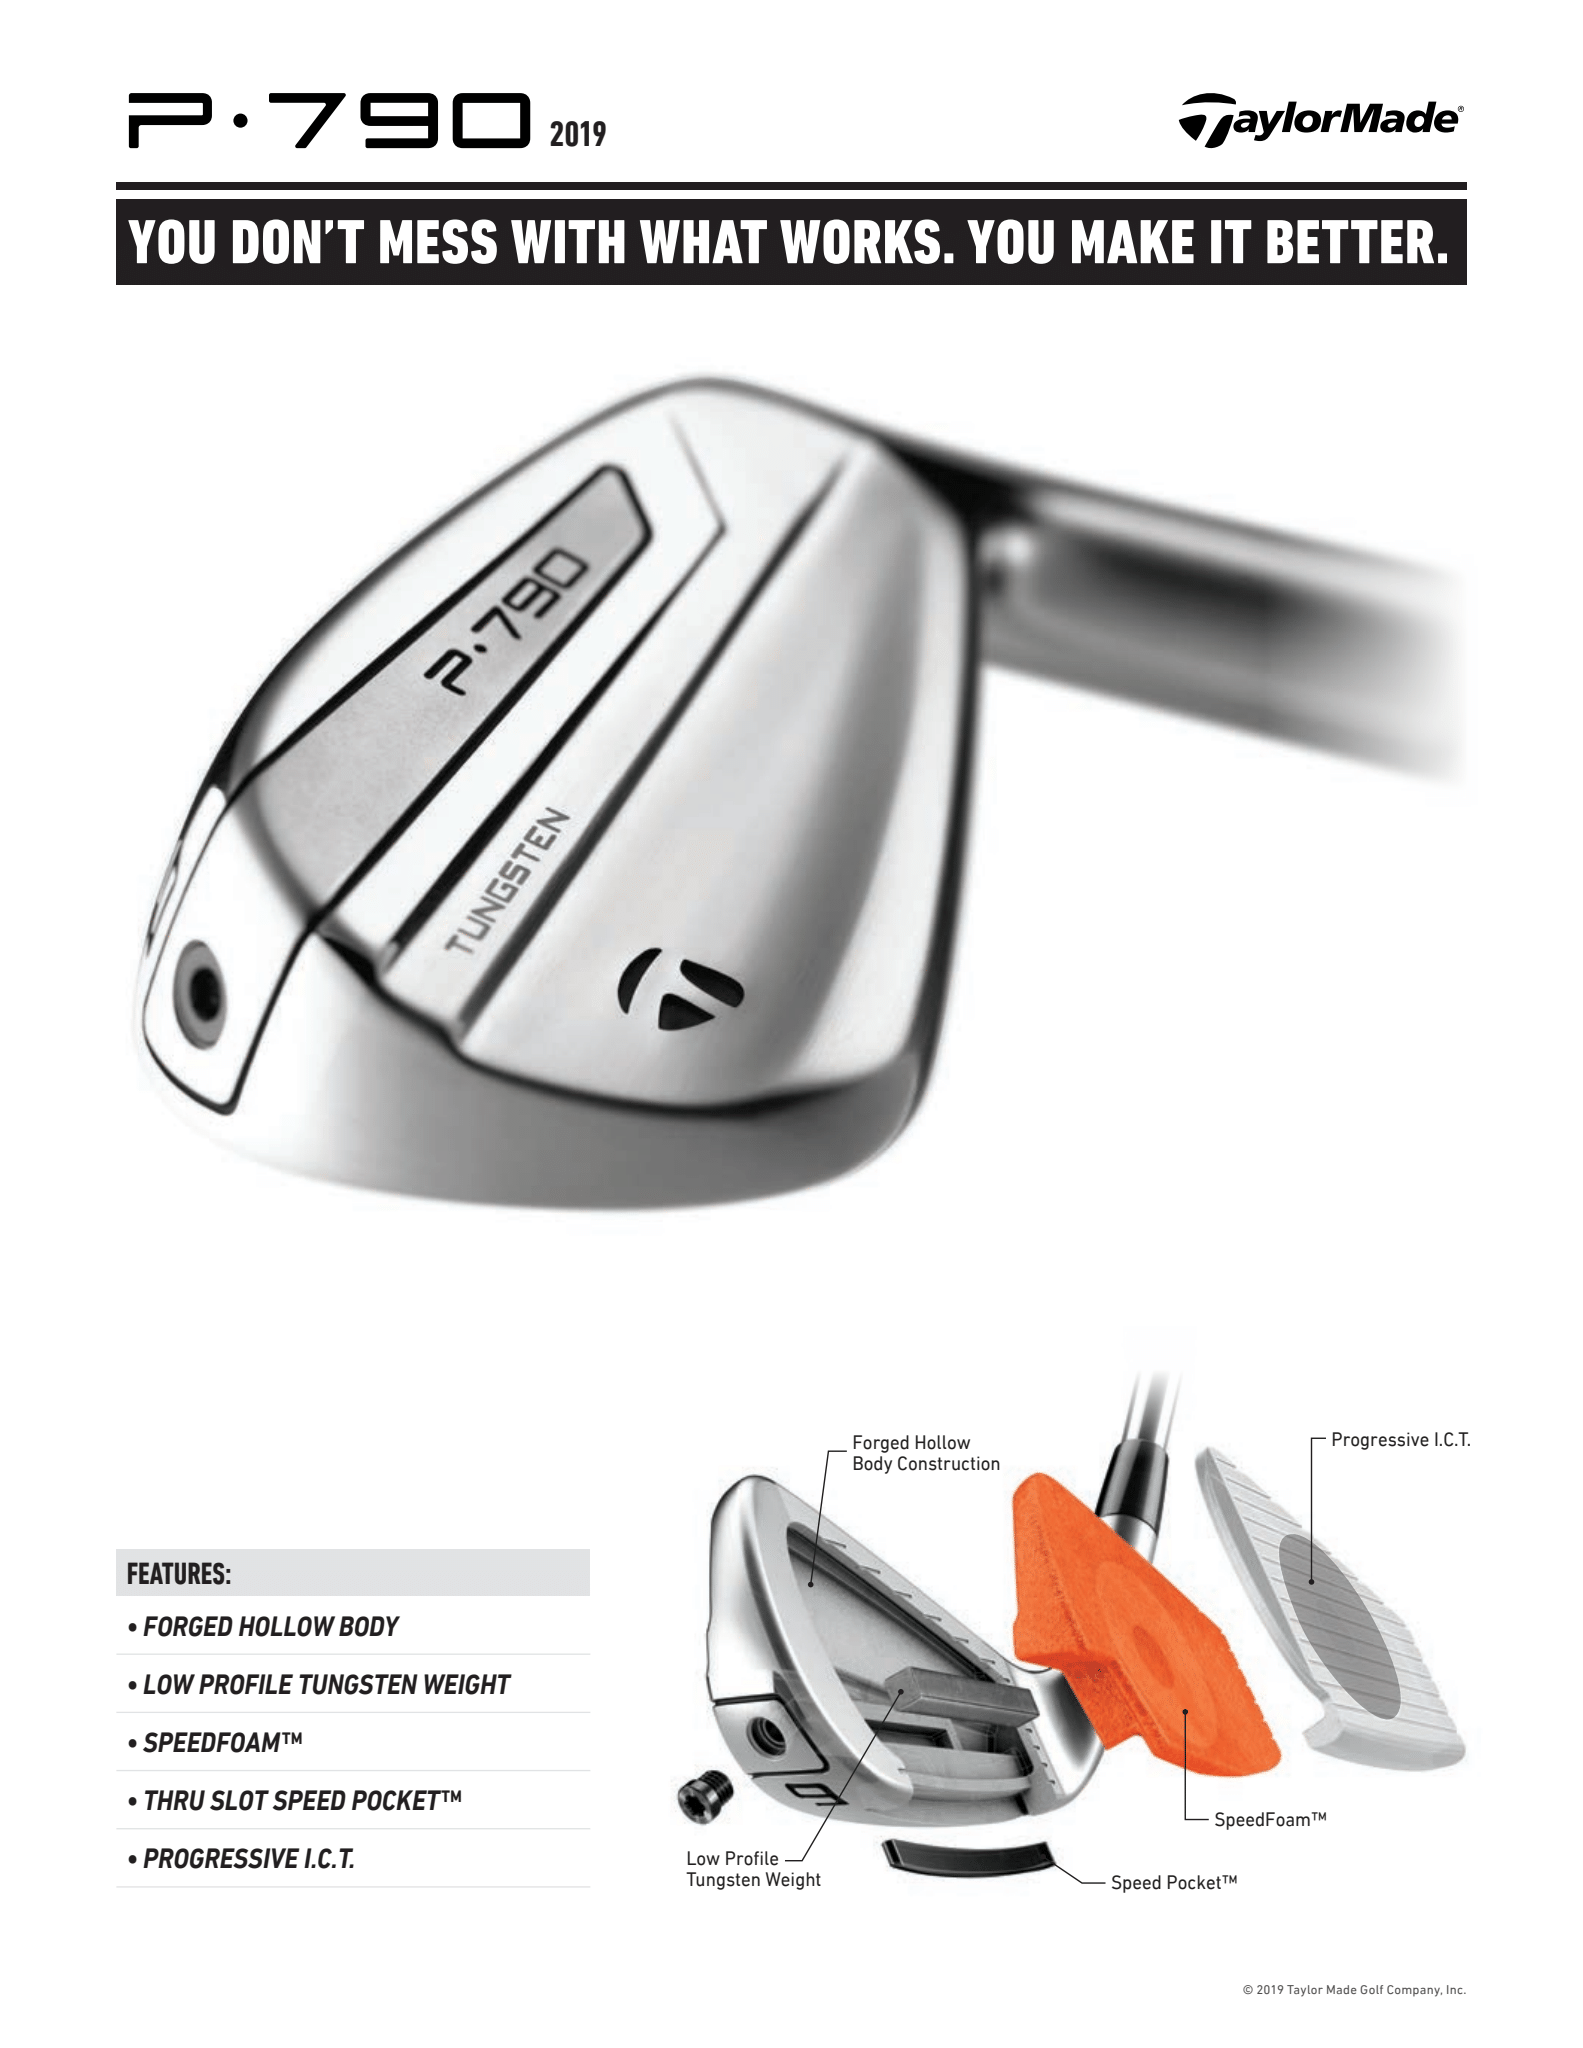 Features of a Taylormade P790 Iron